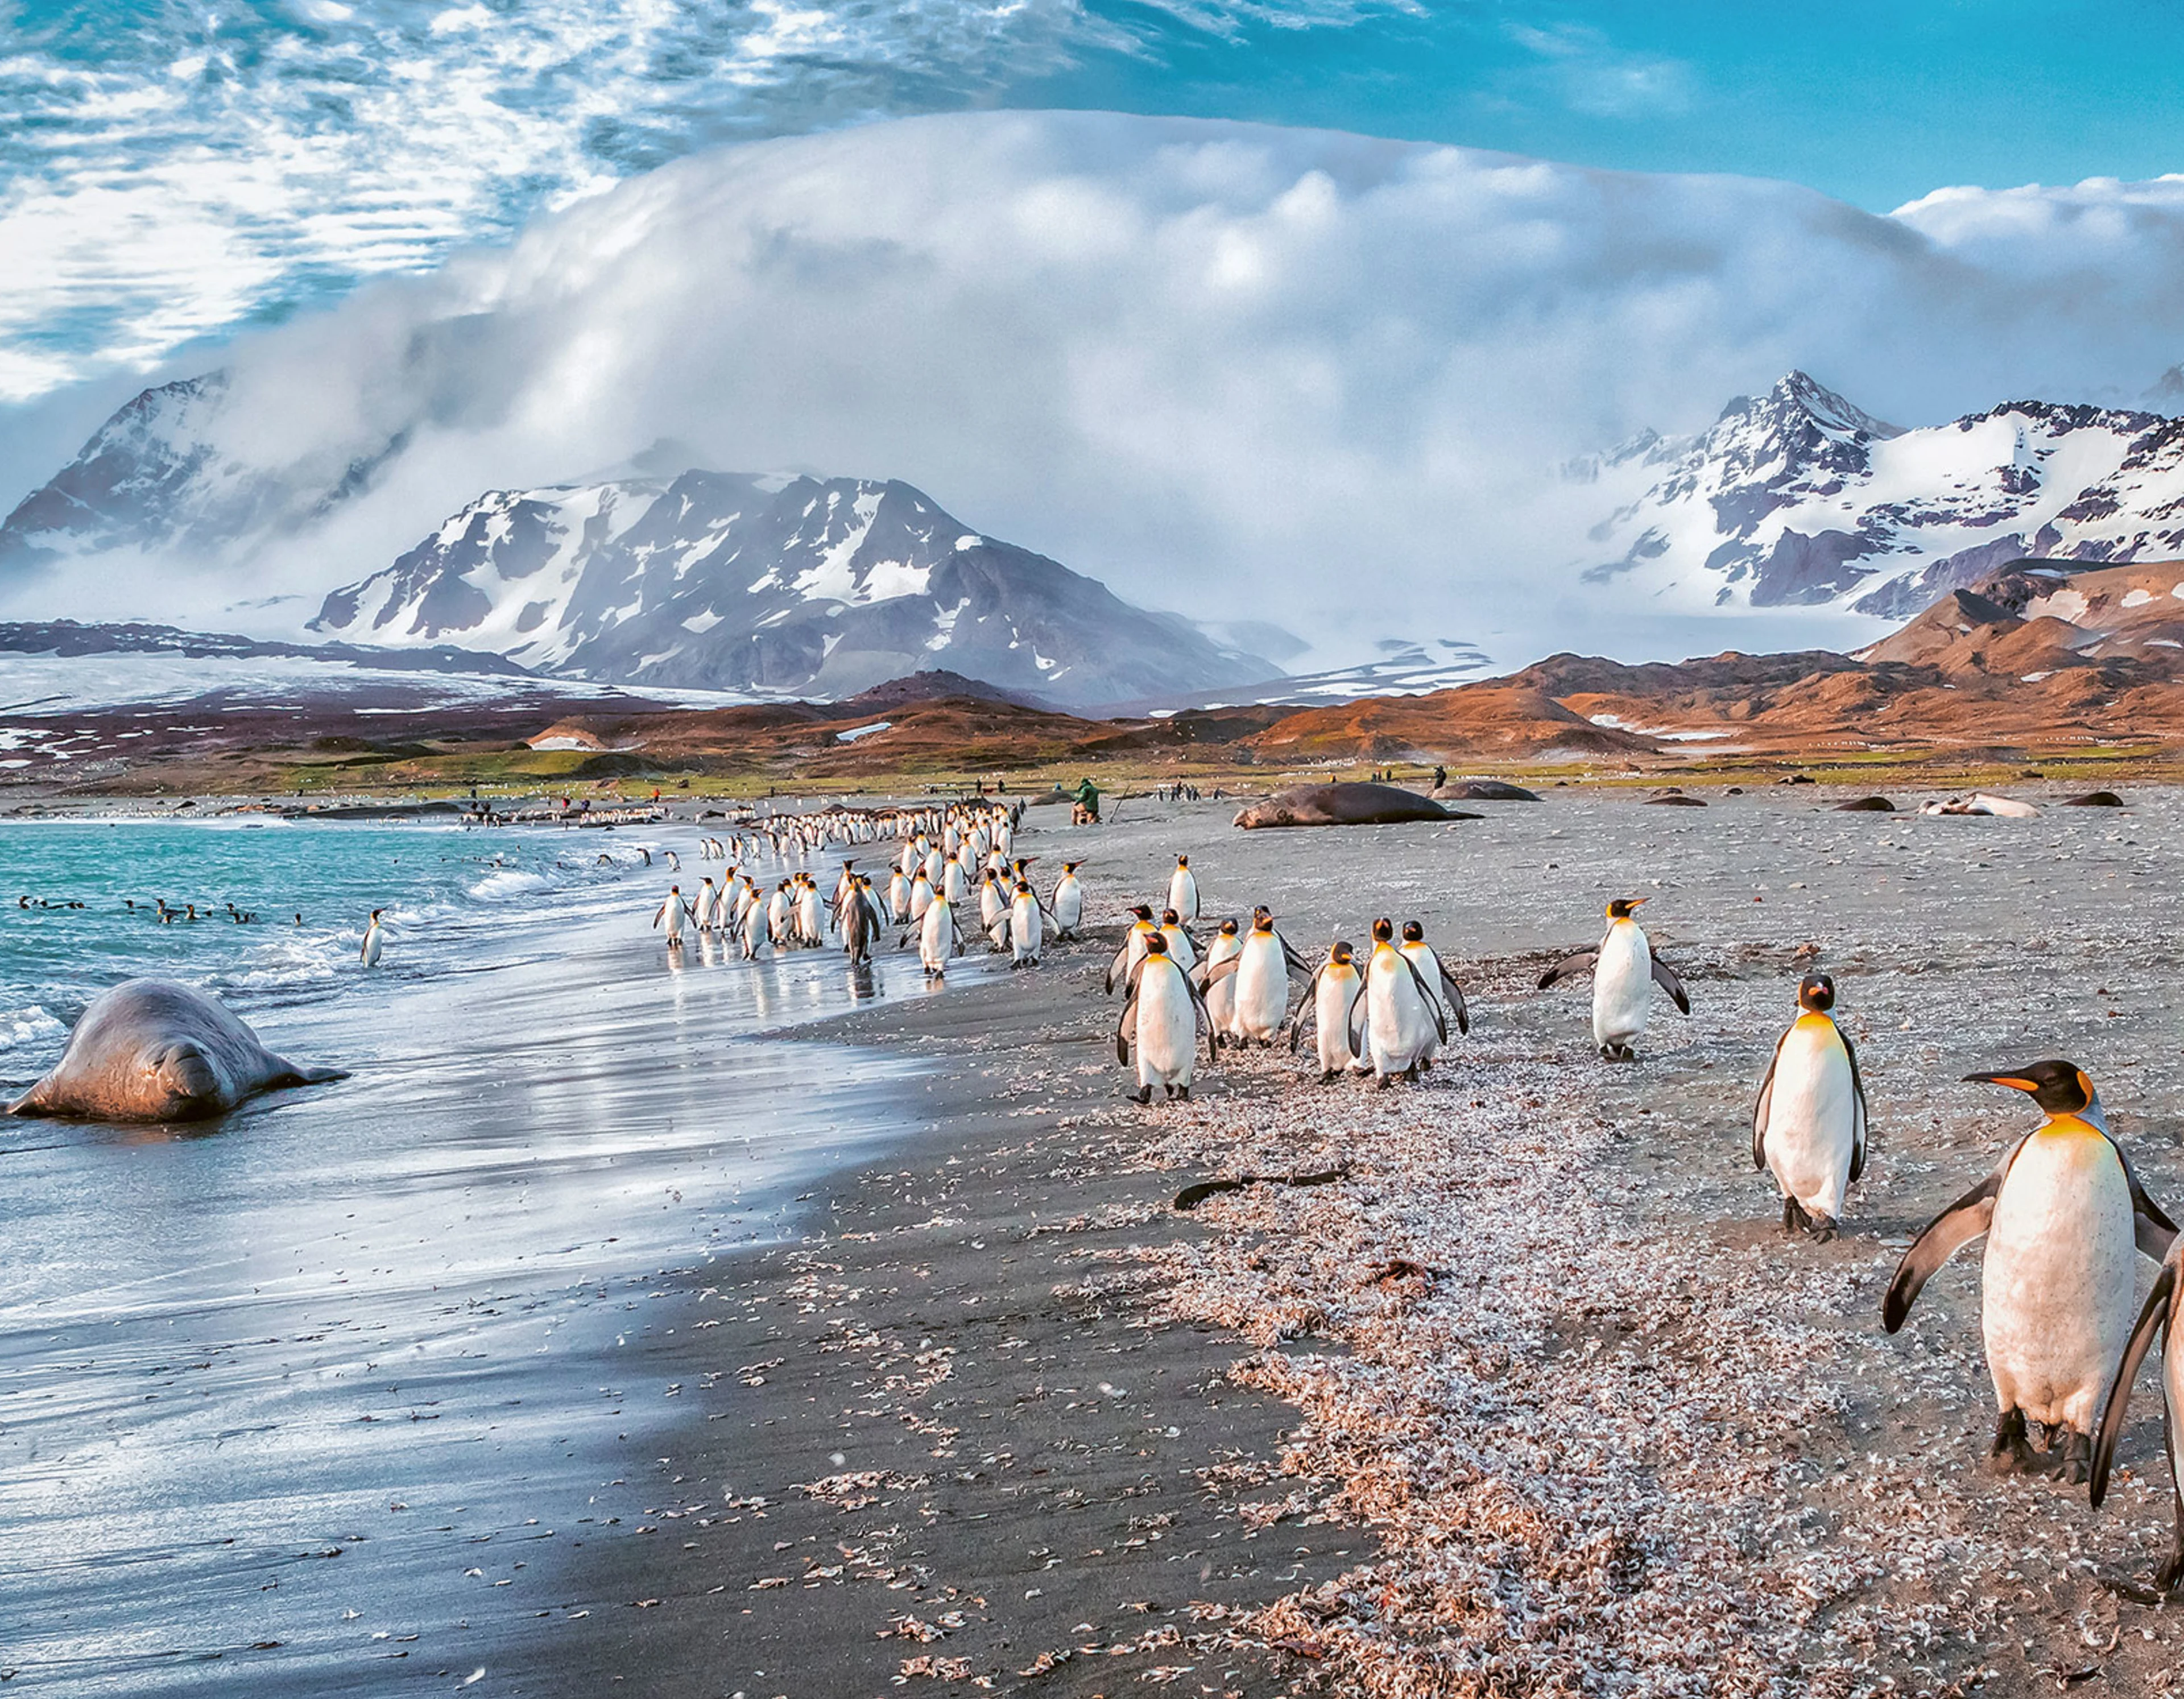 Penguins walking on beach. Seal laying right at the waterfront and snow covered mountains in the background.